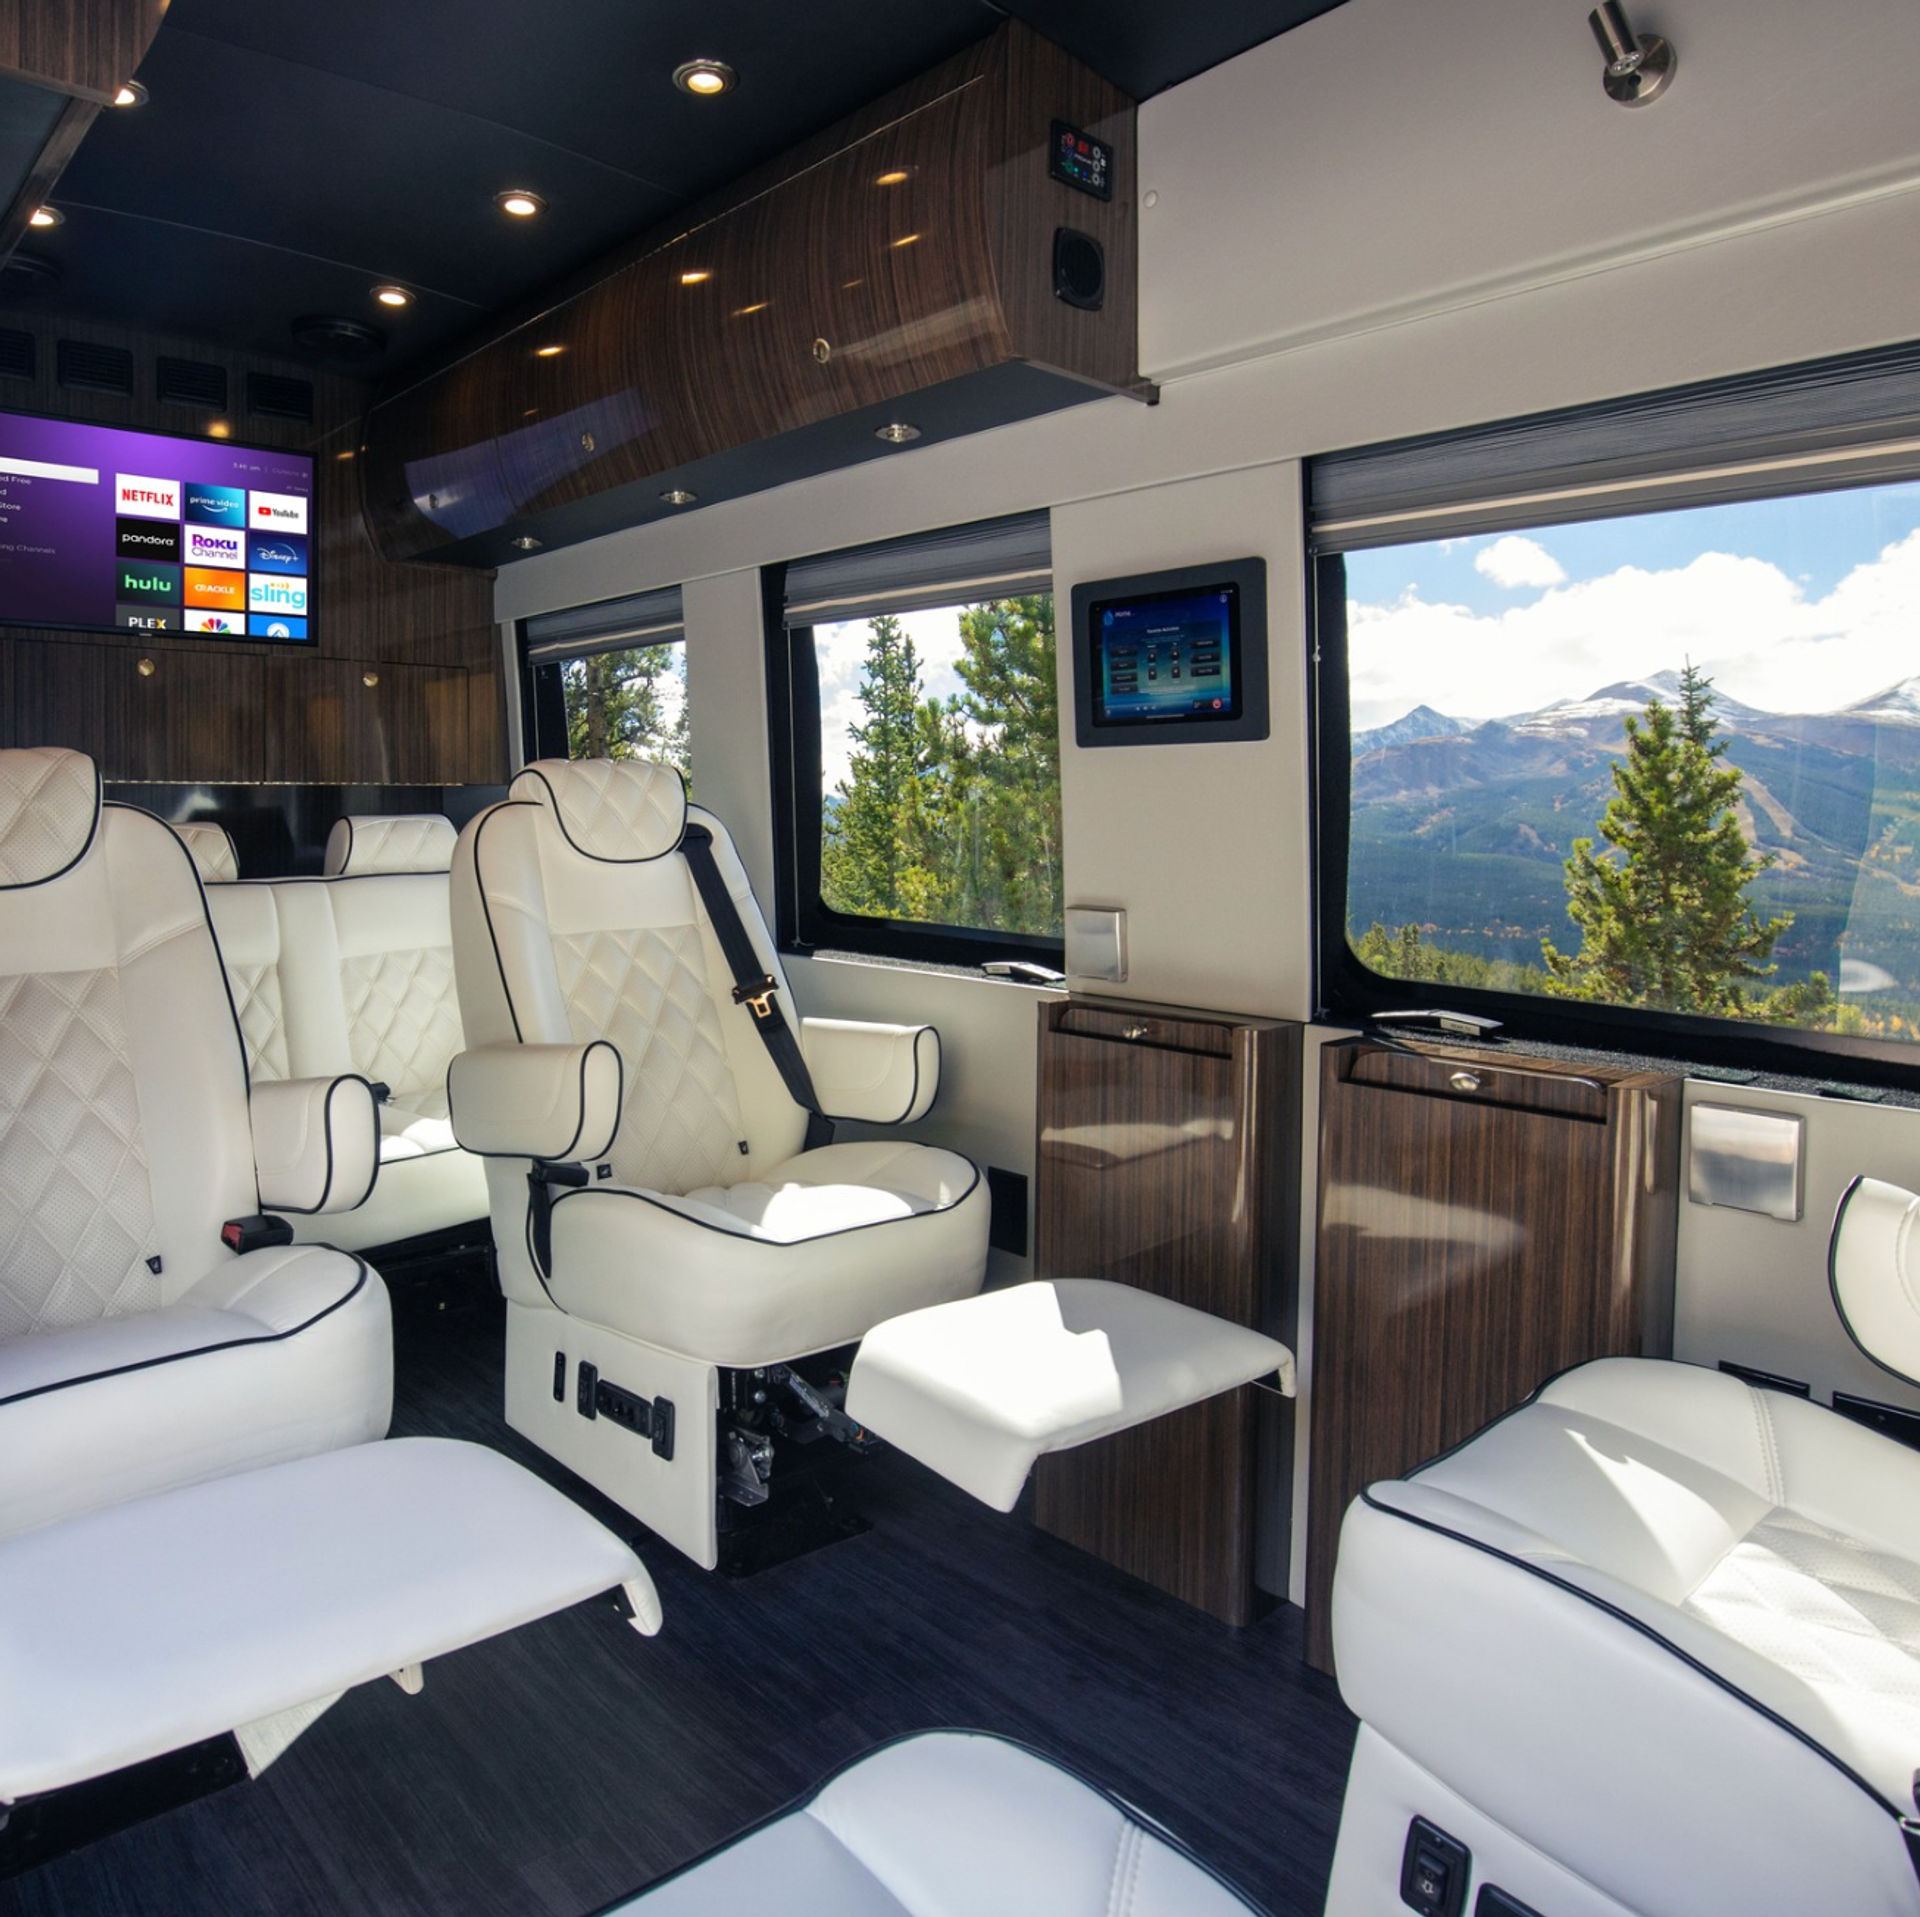 Private Jet-Style Luxury Transportation with TVs & Amenities On Board image 8